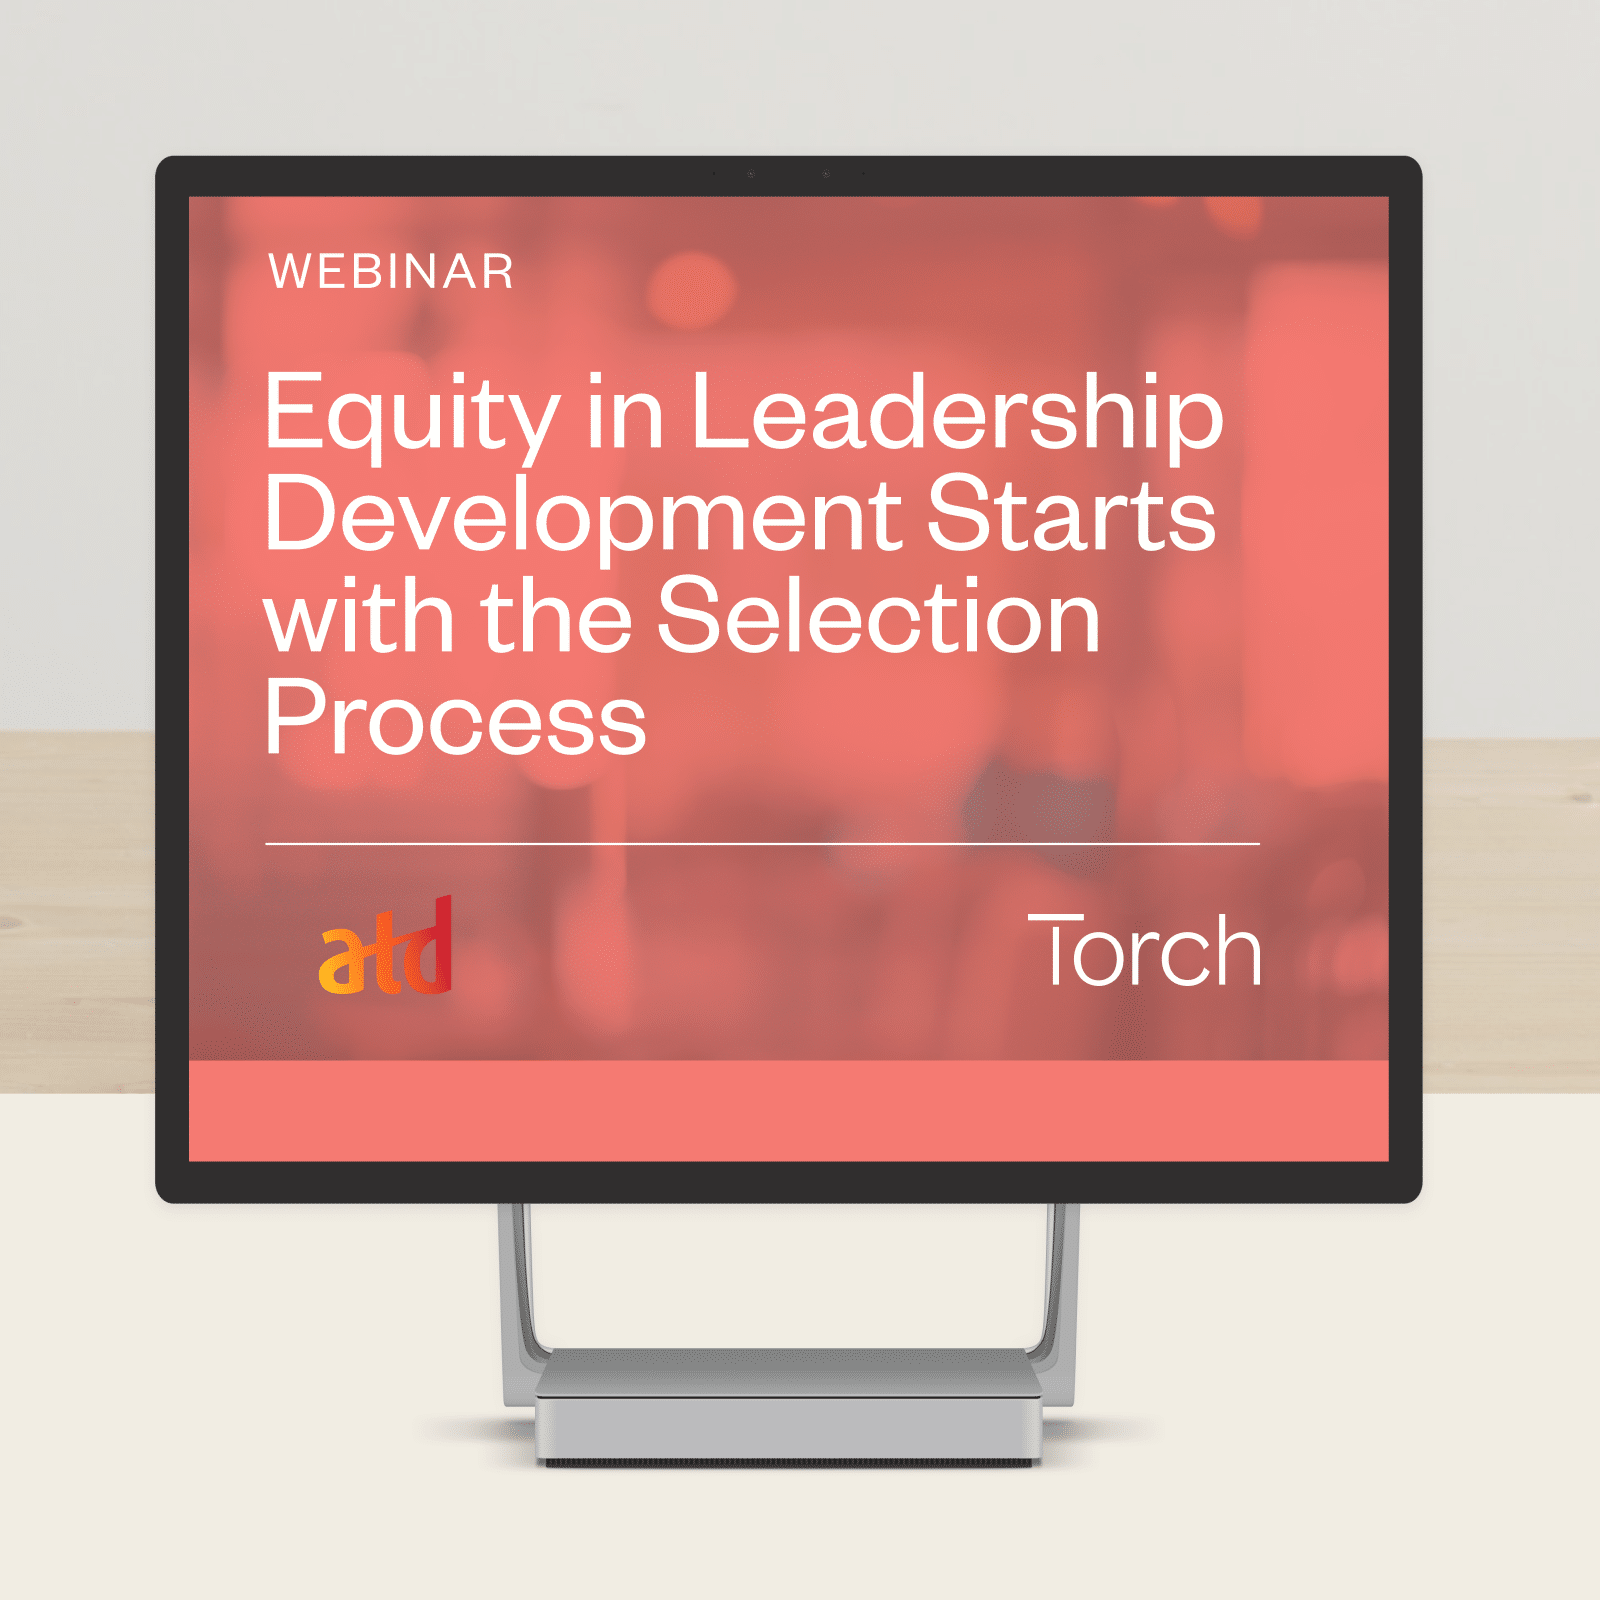 Webinar: Equity in Leadership Development Starts with the Selection Process